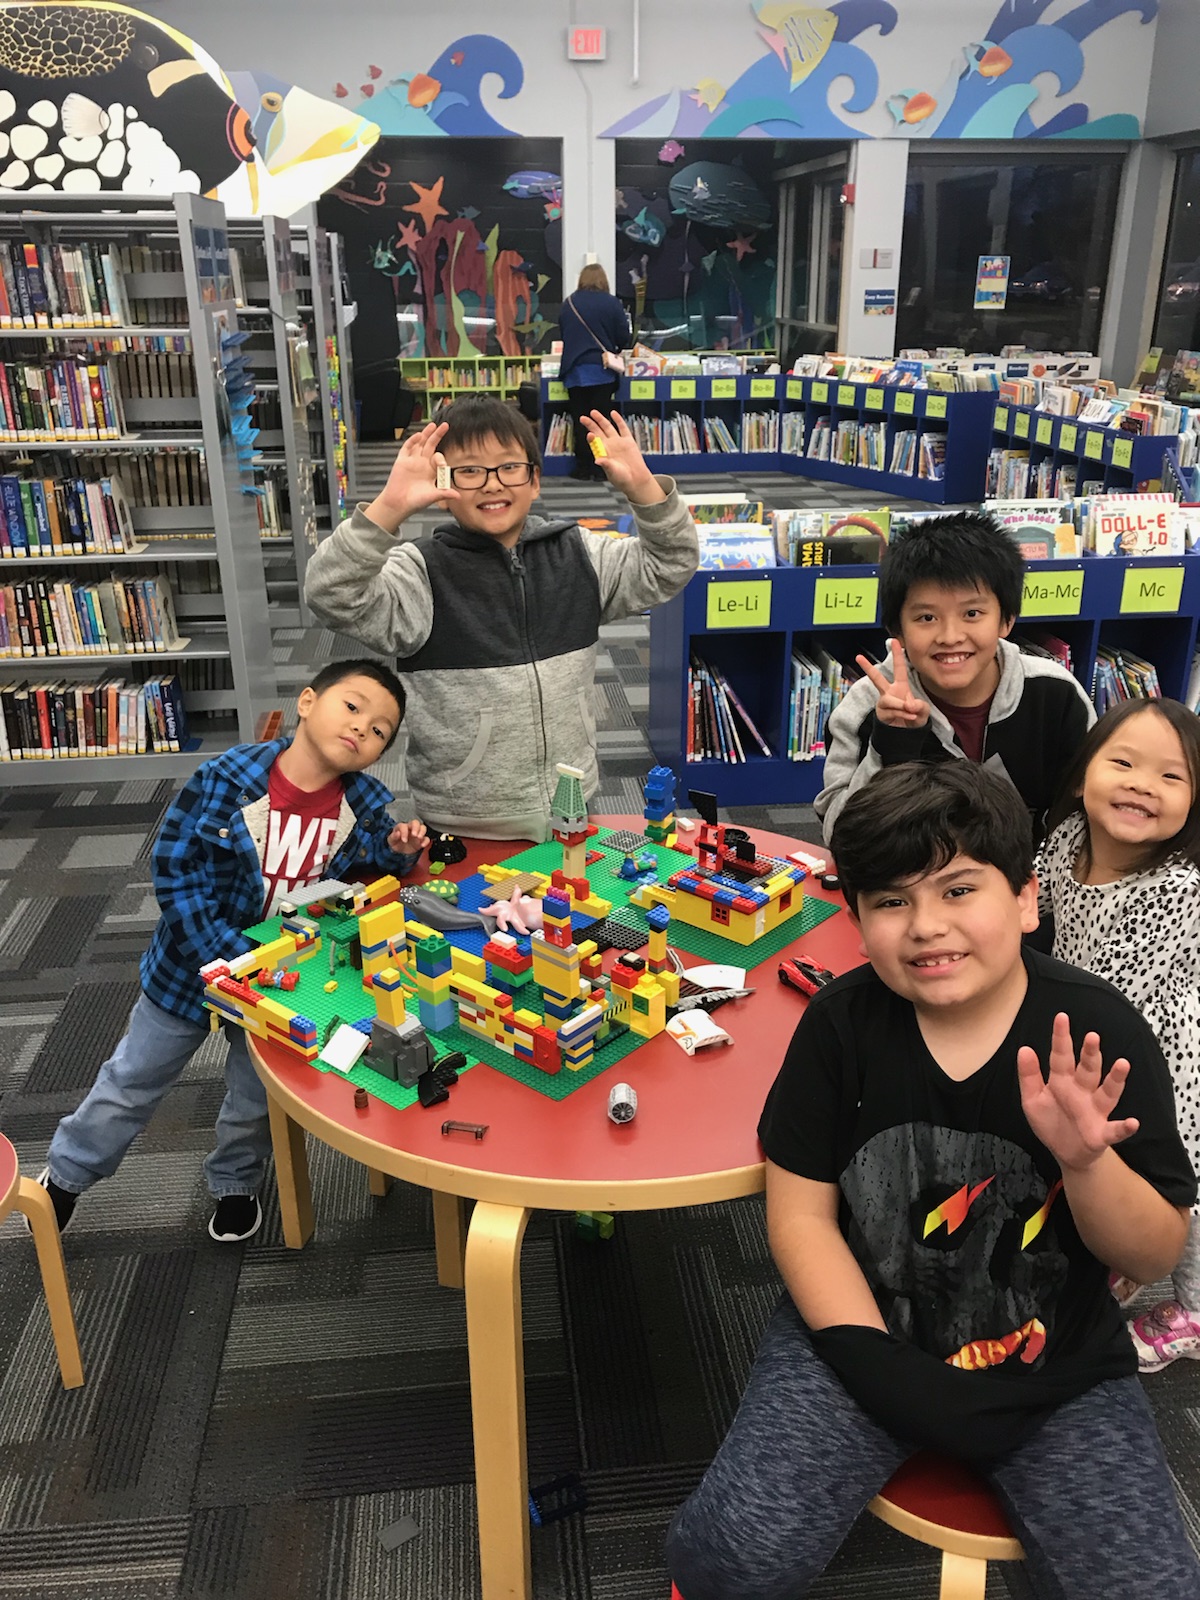 A group of children building with Legos